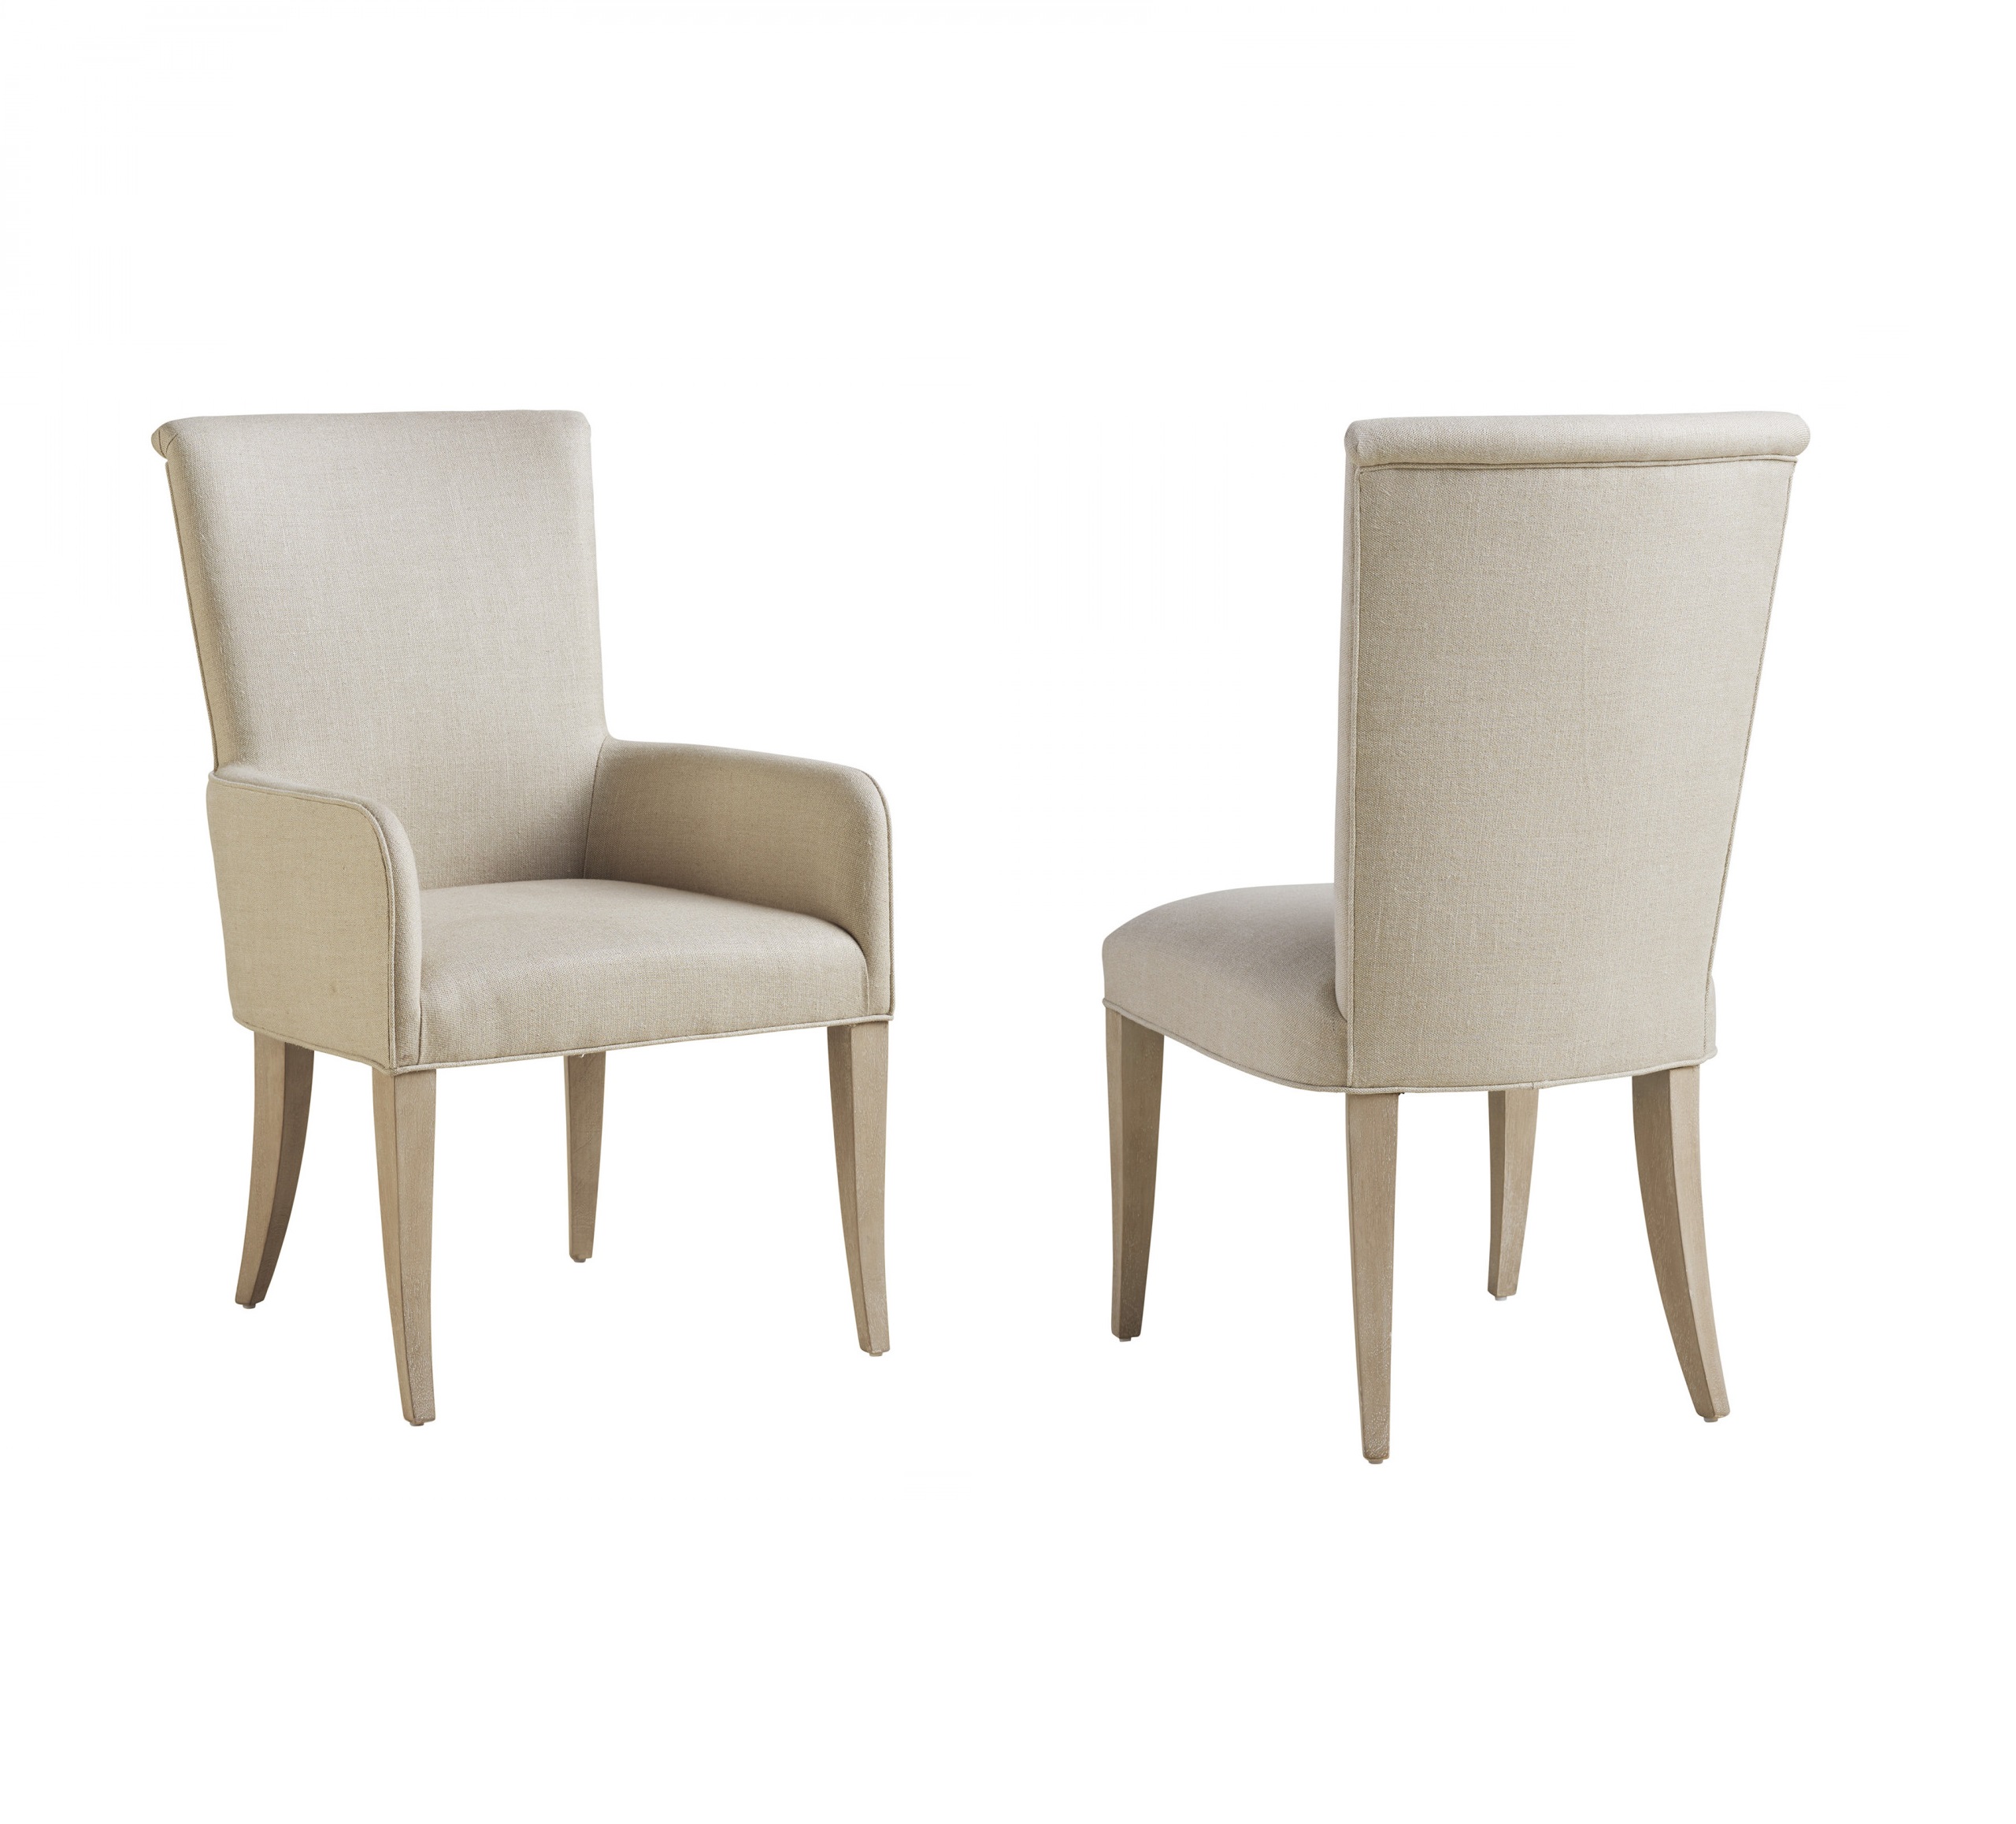 Serra Upholstered Chair, Lexington Leather Dining Chairs For Sale Brooklyn, New York, Furniture By ABD